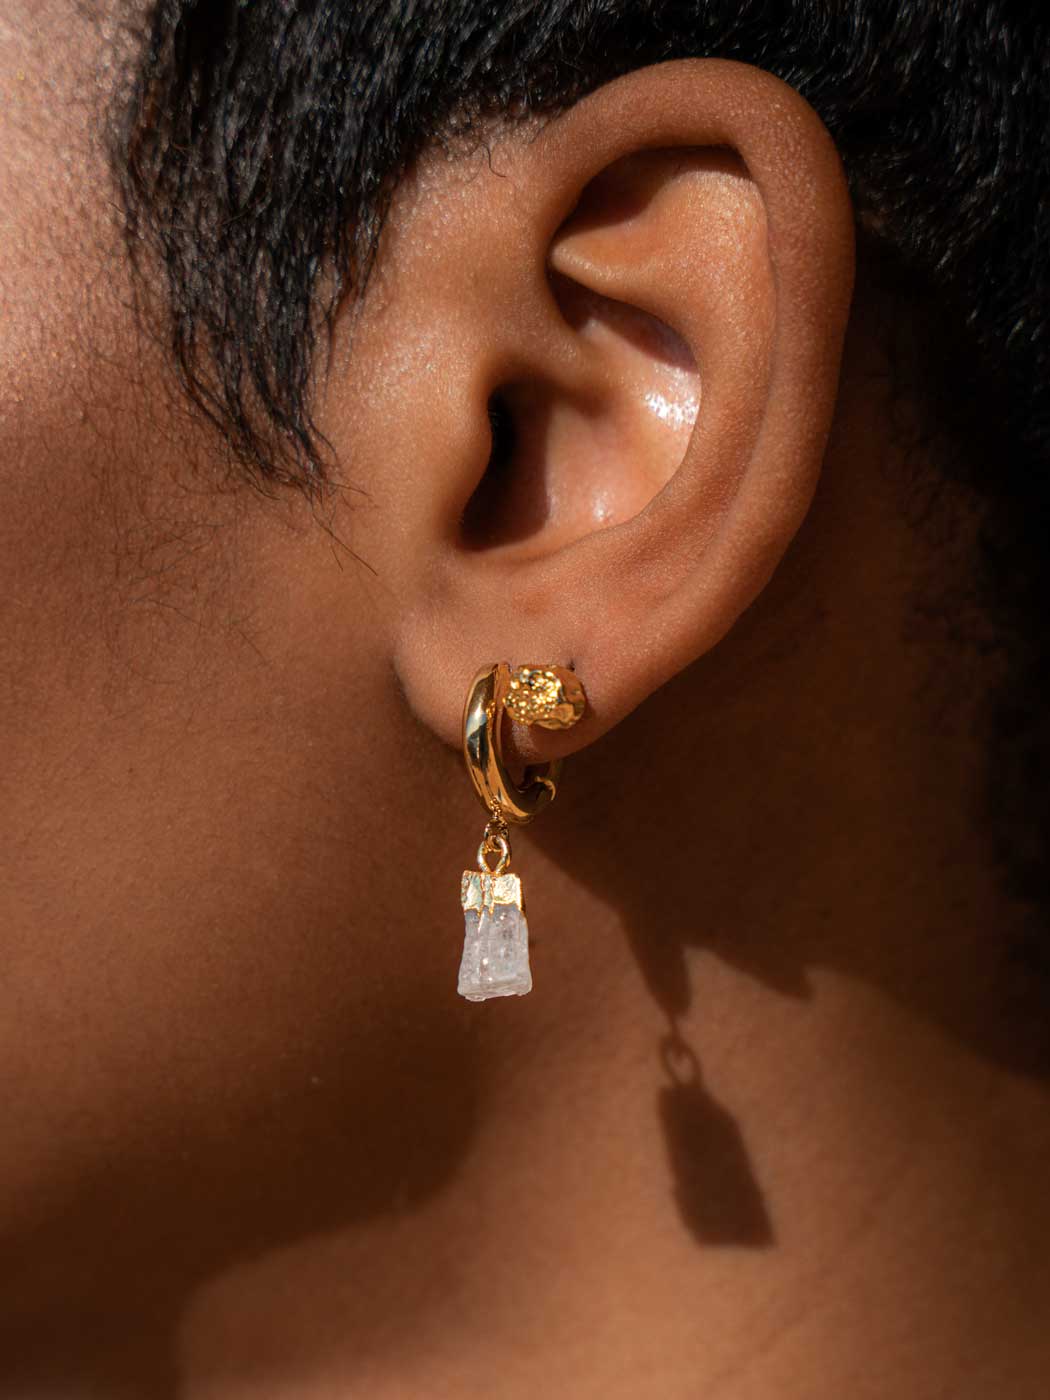 GOLD MOONSTONE HOOPS ON BODY